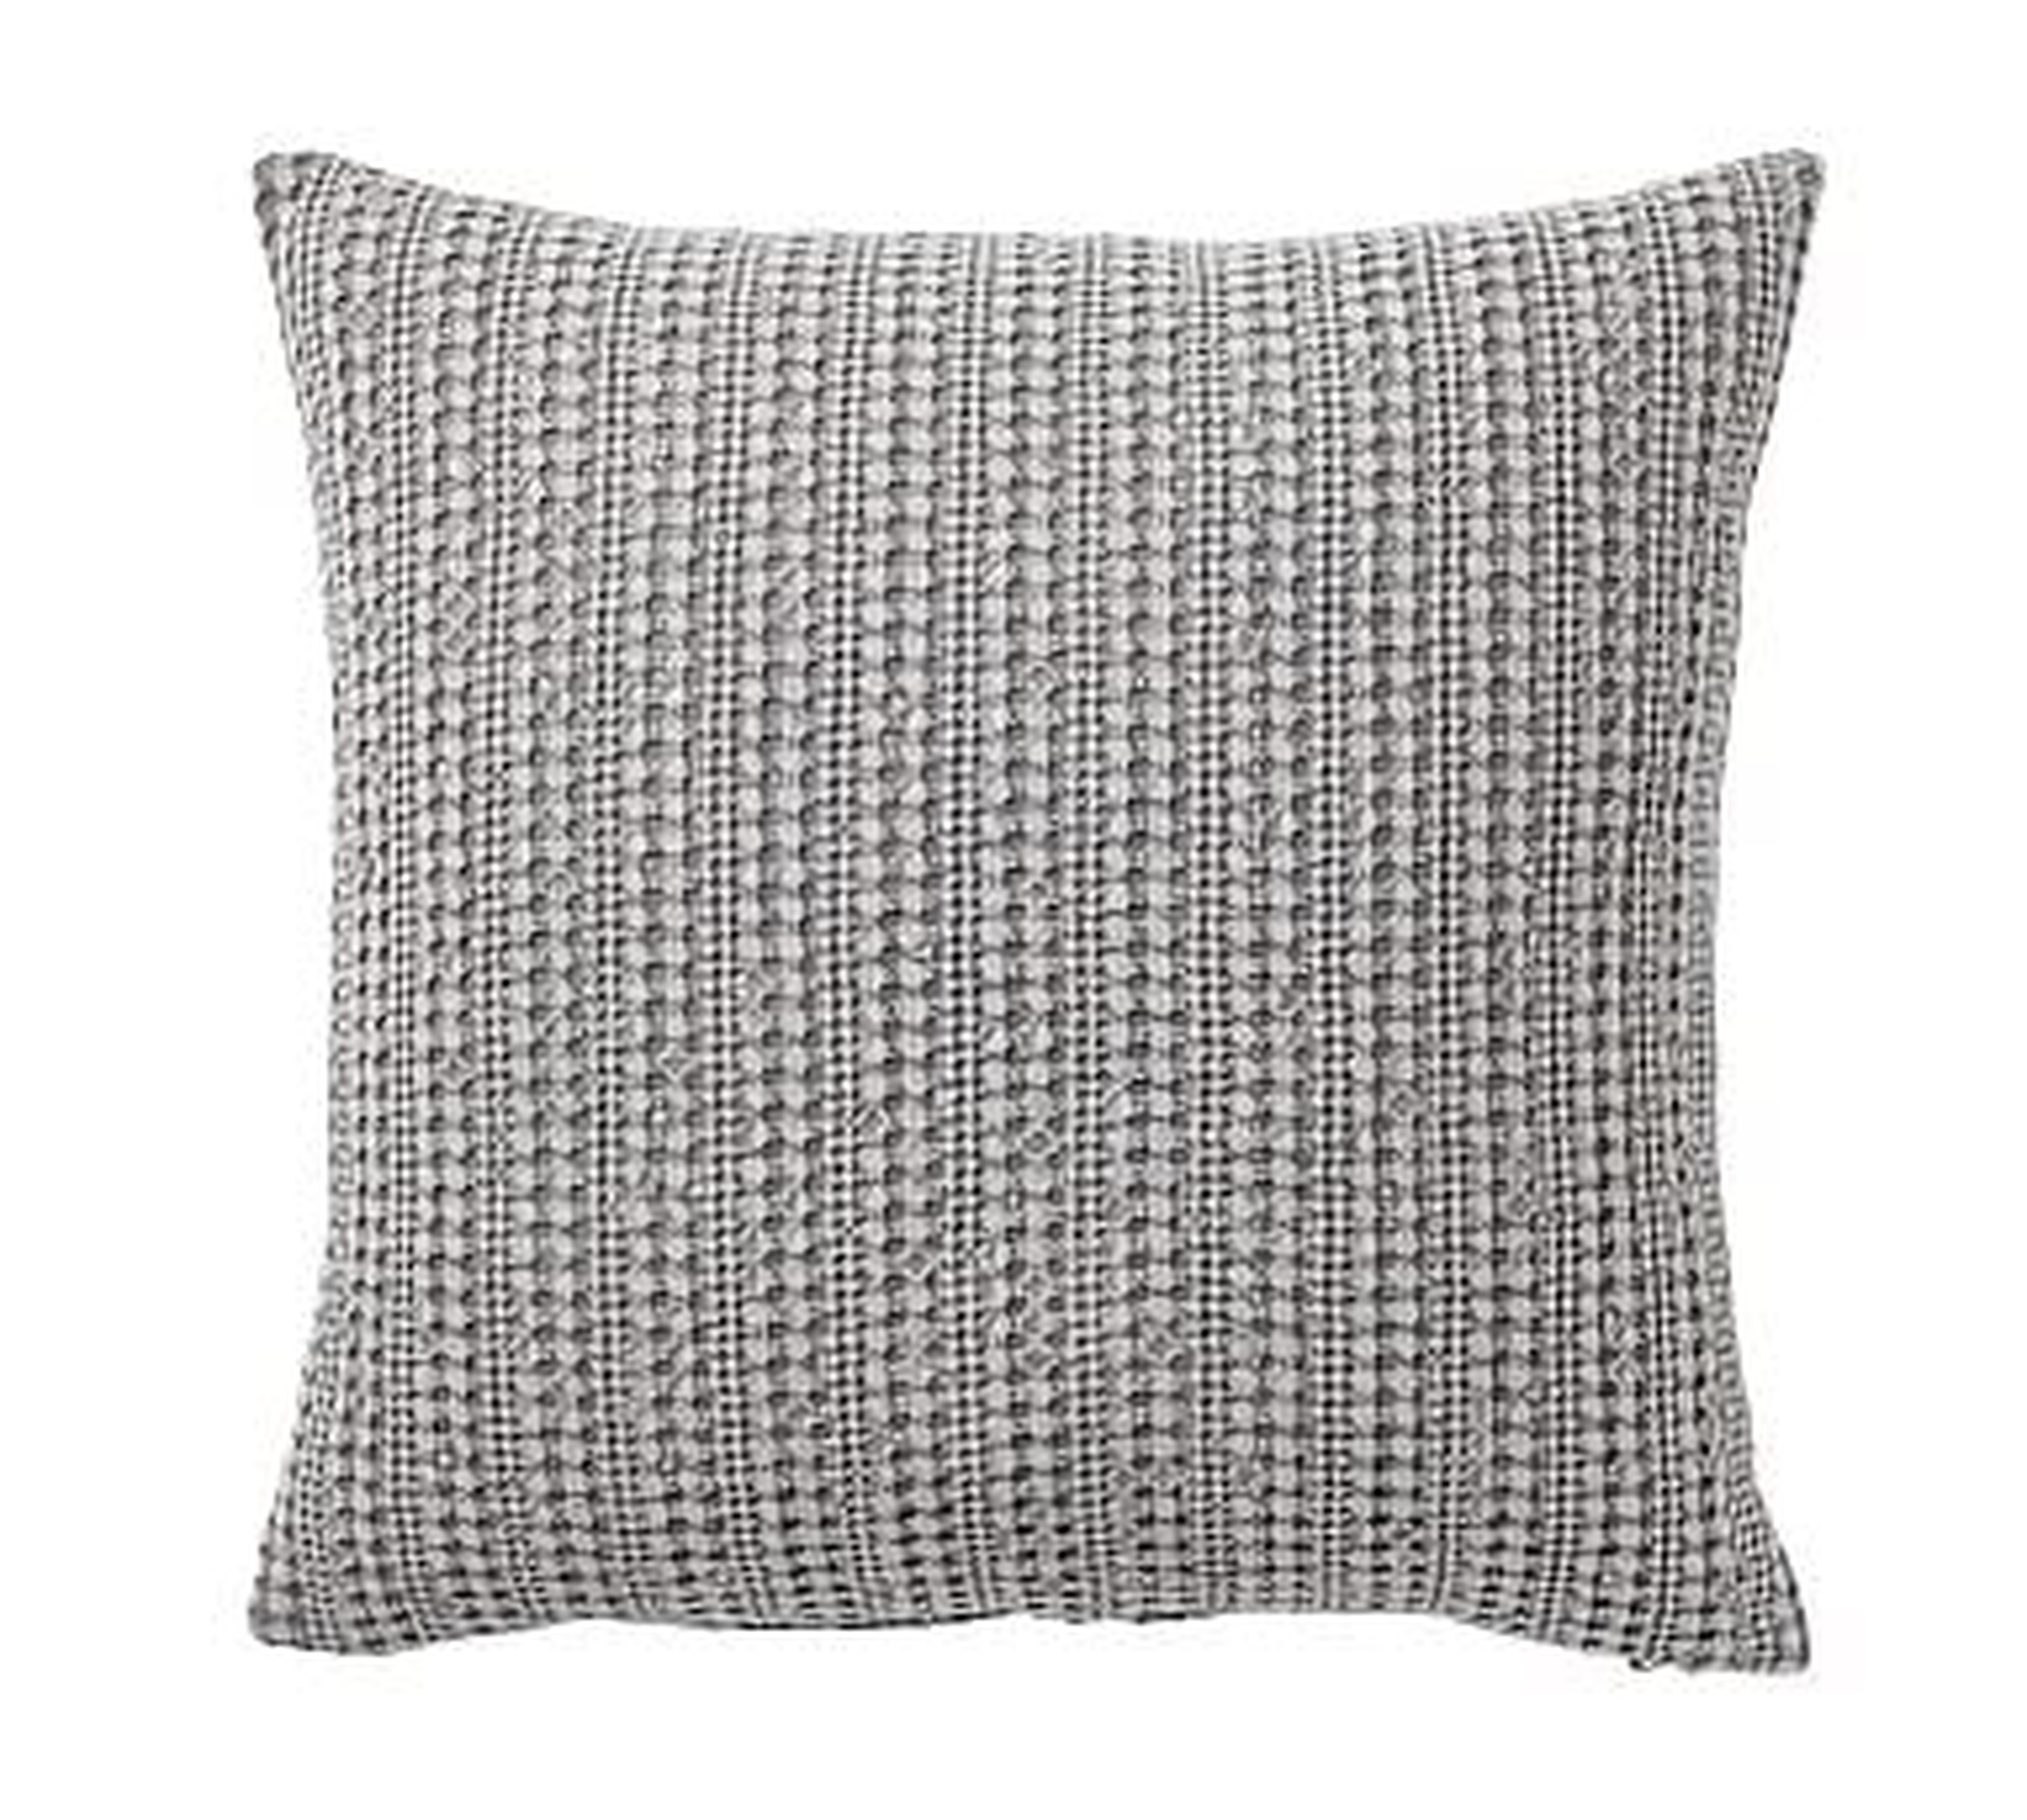 Honeycomb Pillow Cover, 18", Flagstone - Pottery Barn